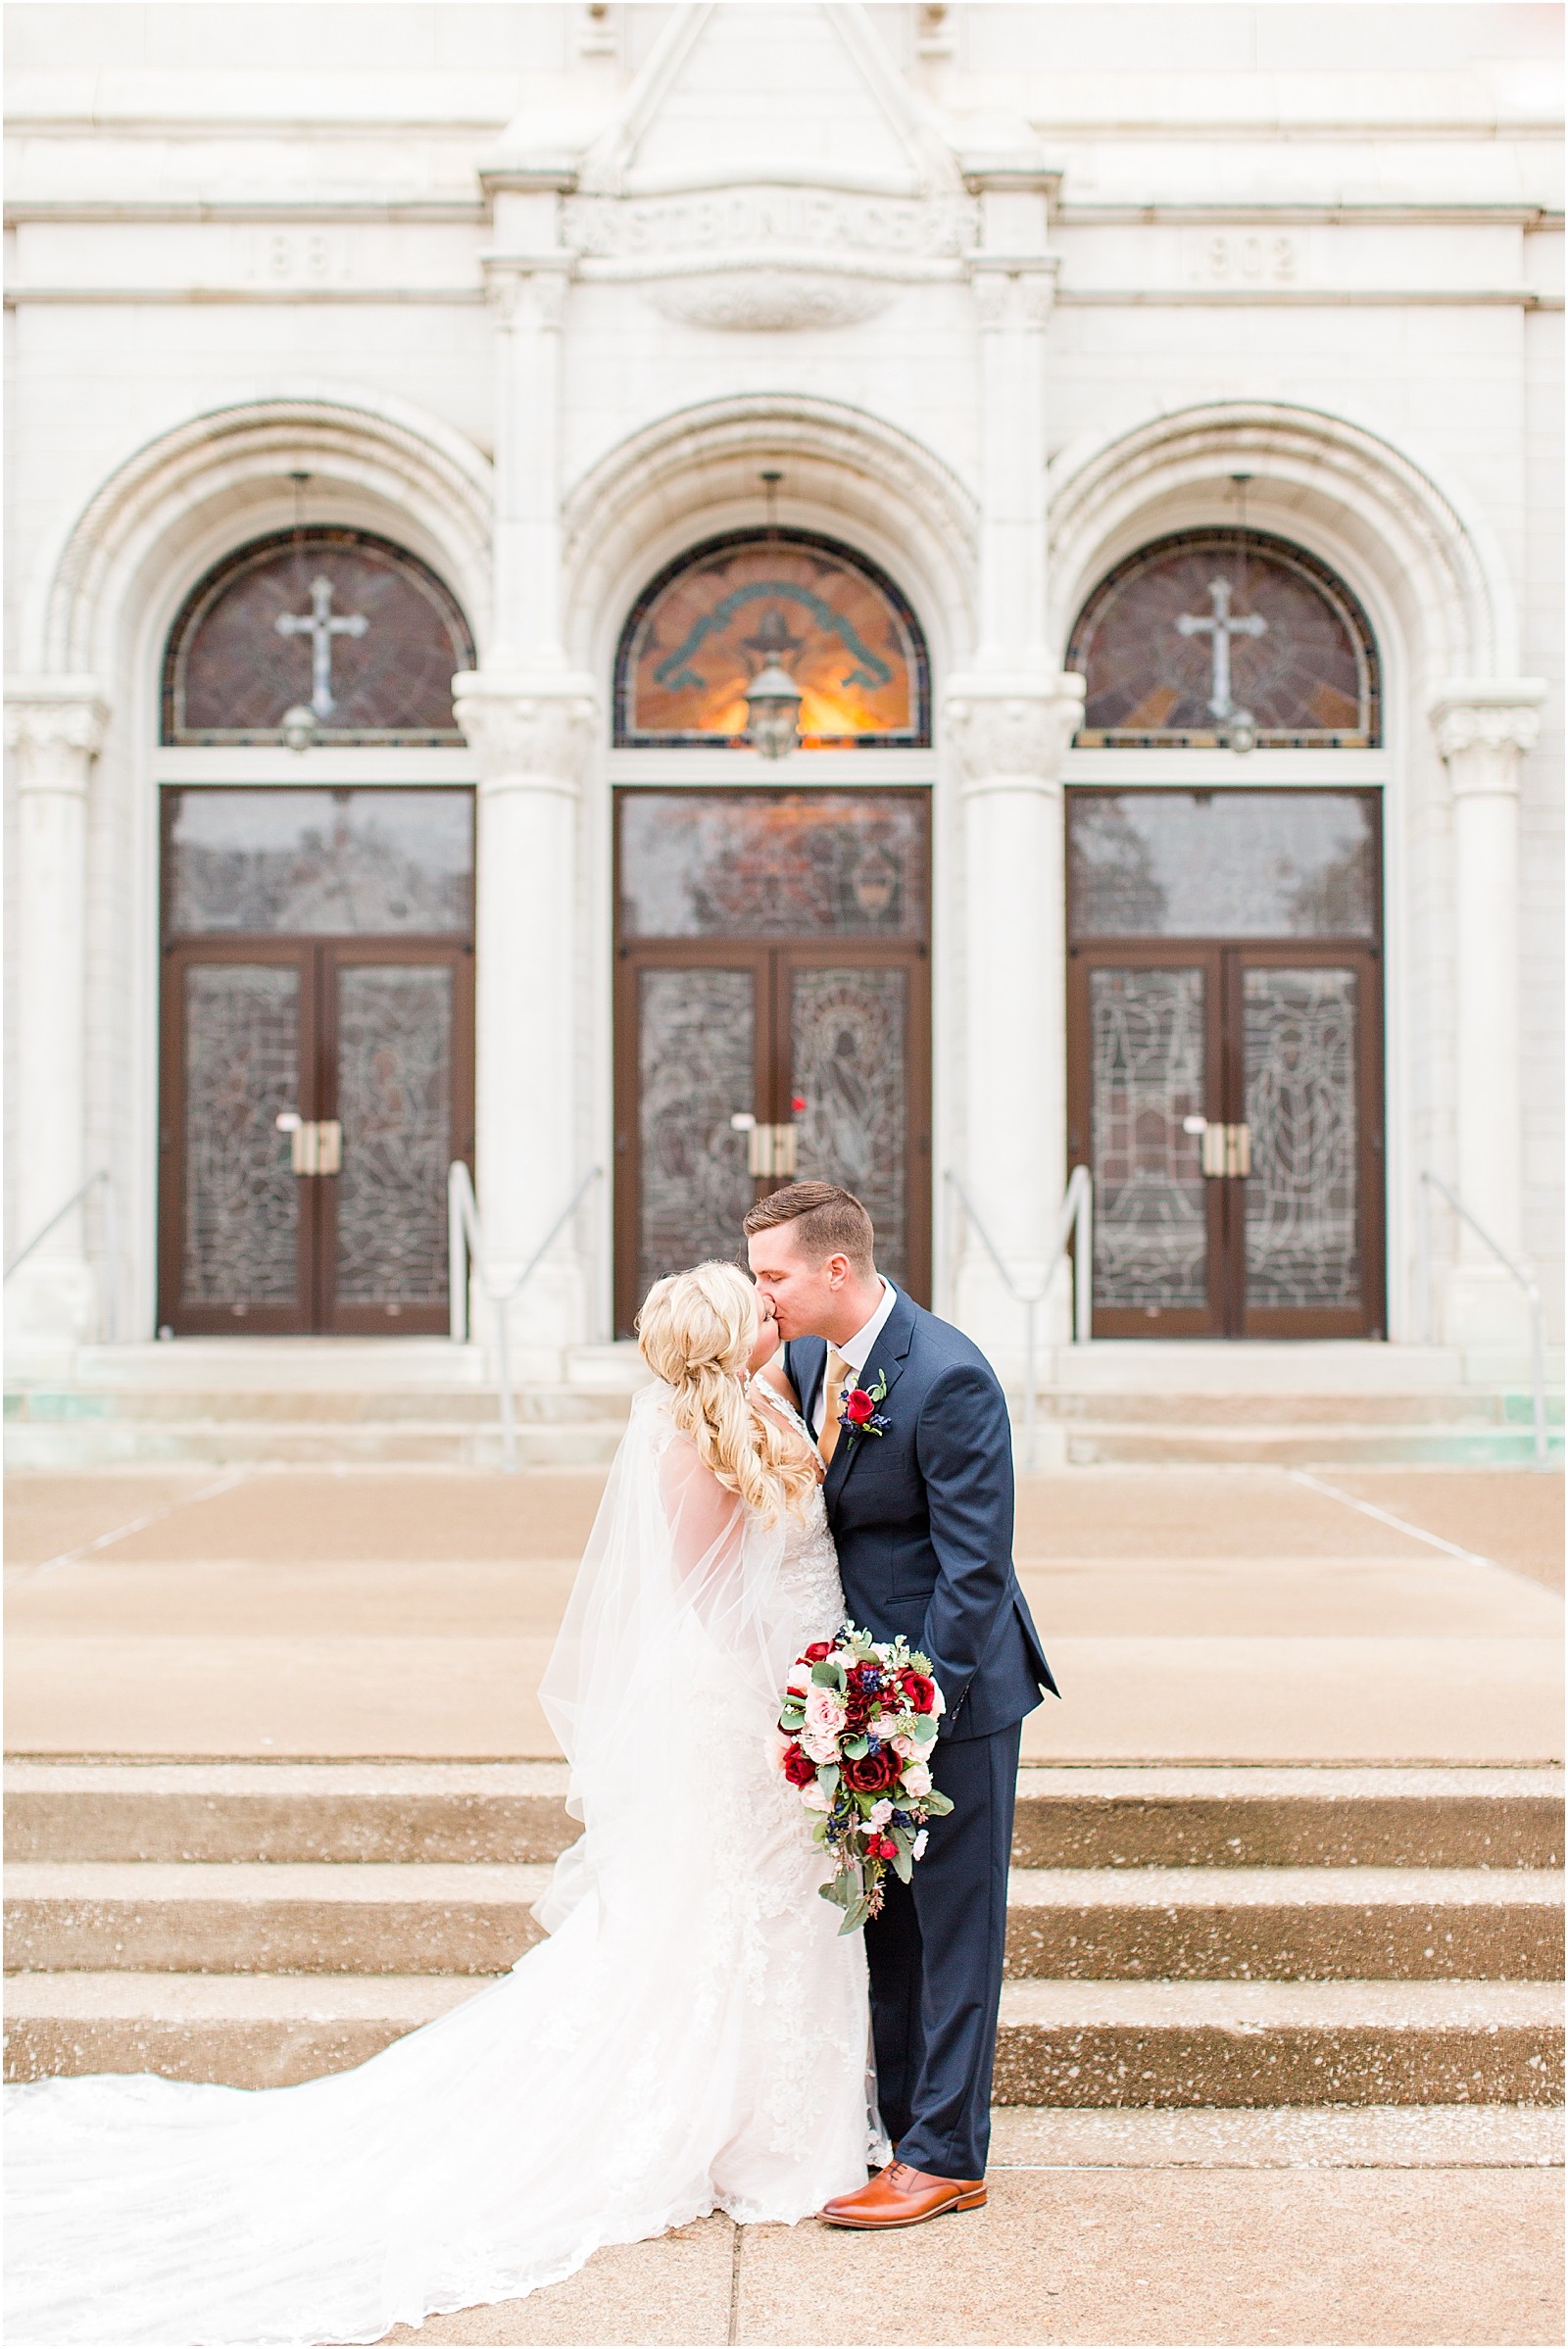 Haylee and Dillon's Evansville, Indiana wedding by Bret and Brandie Photography.0065.jpg